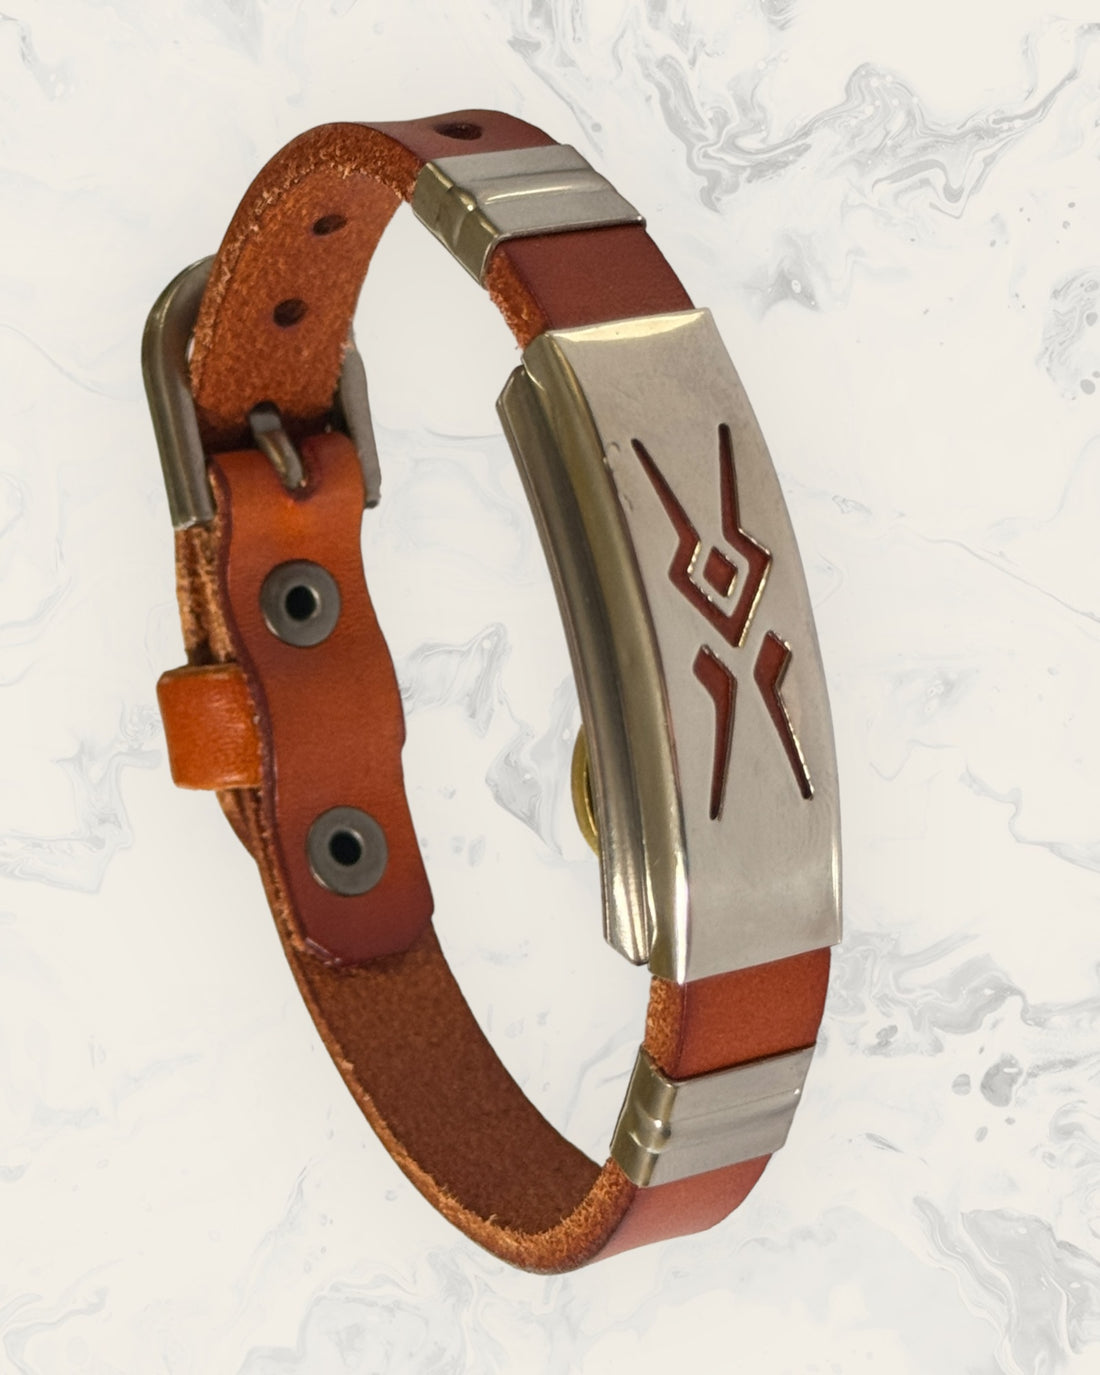 Natural Pain Relief and EMF Protection Bracelet Leather Band Color Burnt Orange with Aztec design on a silver metal slider